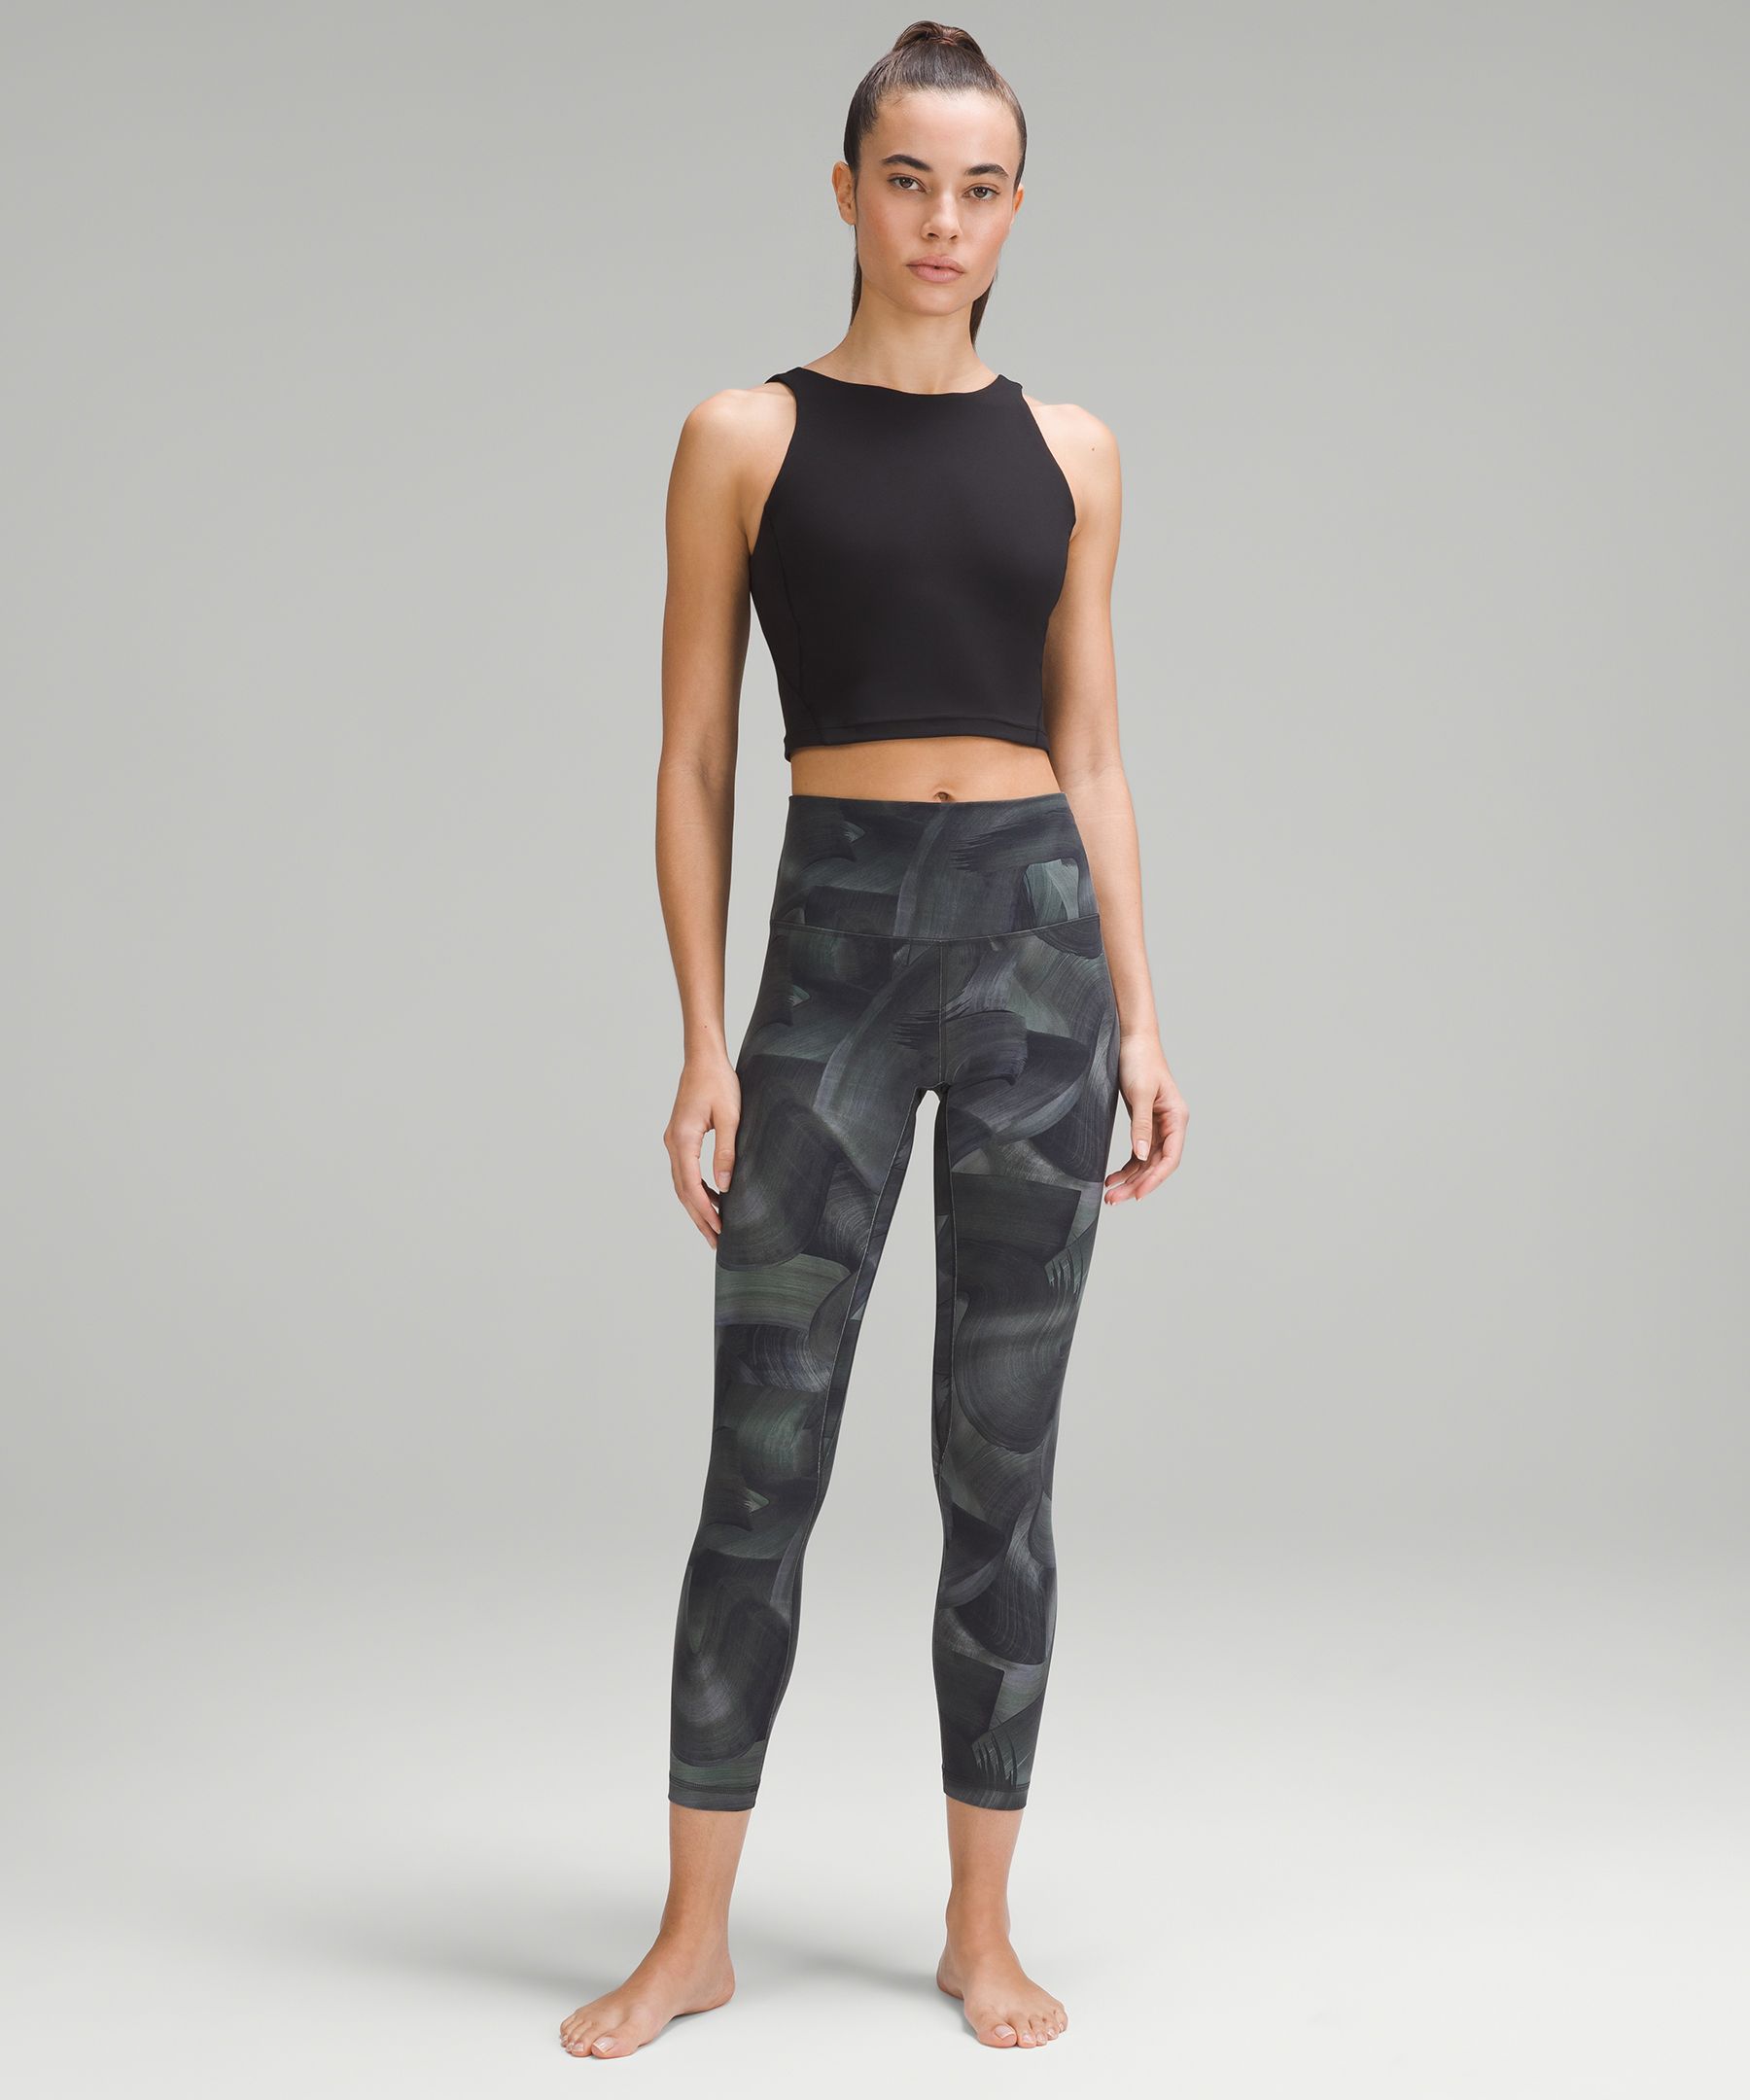 Shop the Align Pant II 25, Women's Yoga Pants. Designed to minimize  distractions and maximize com…